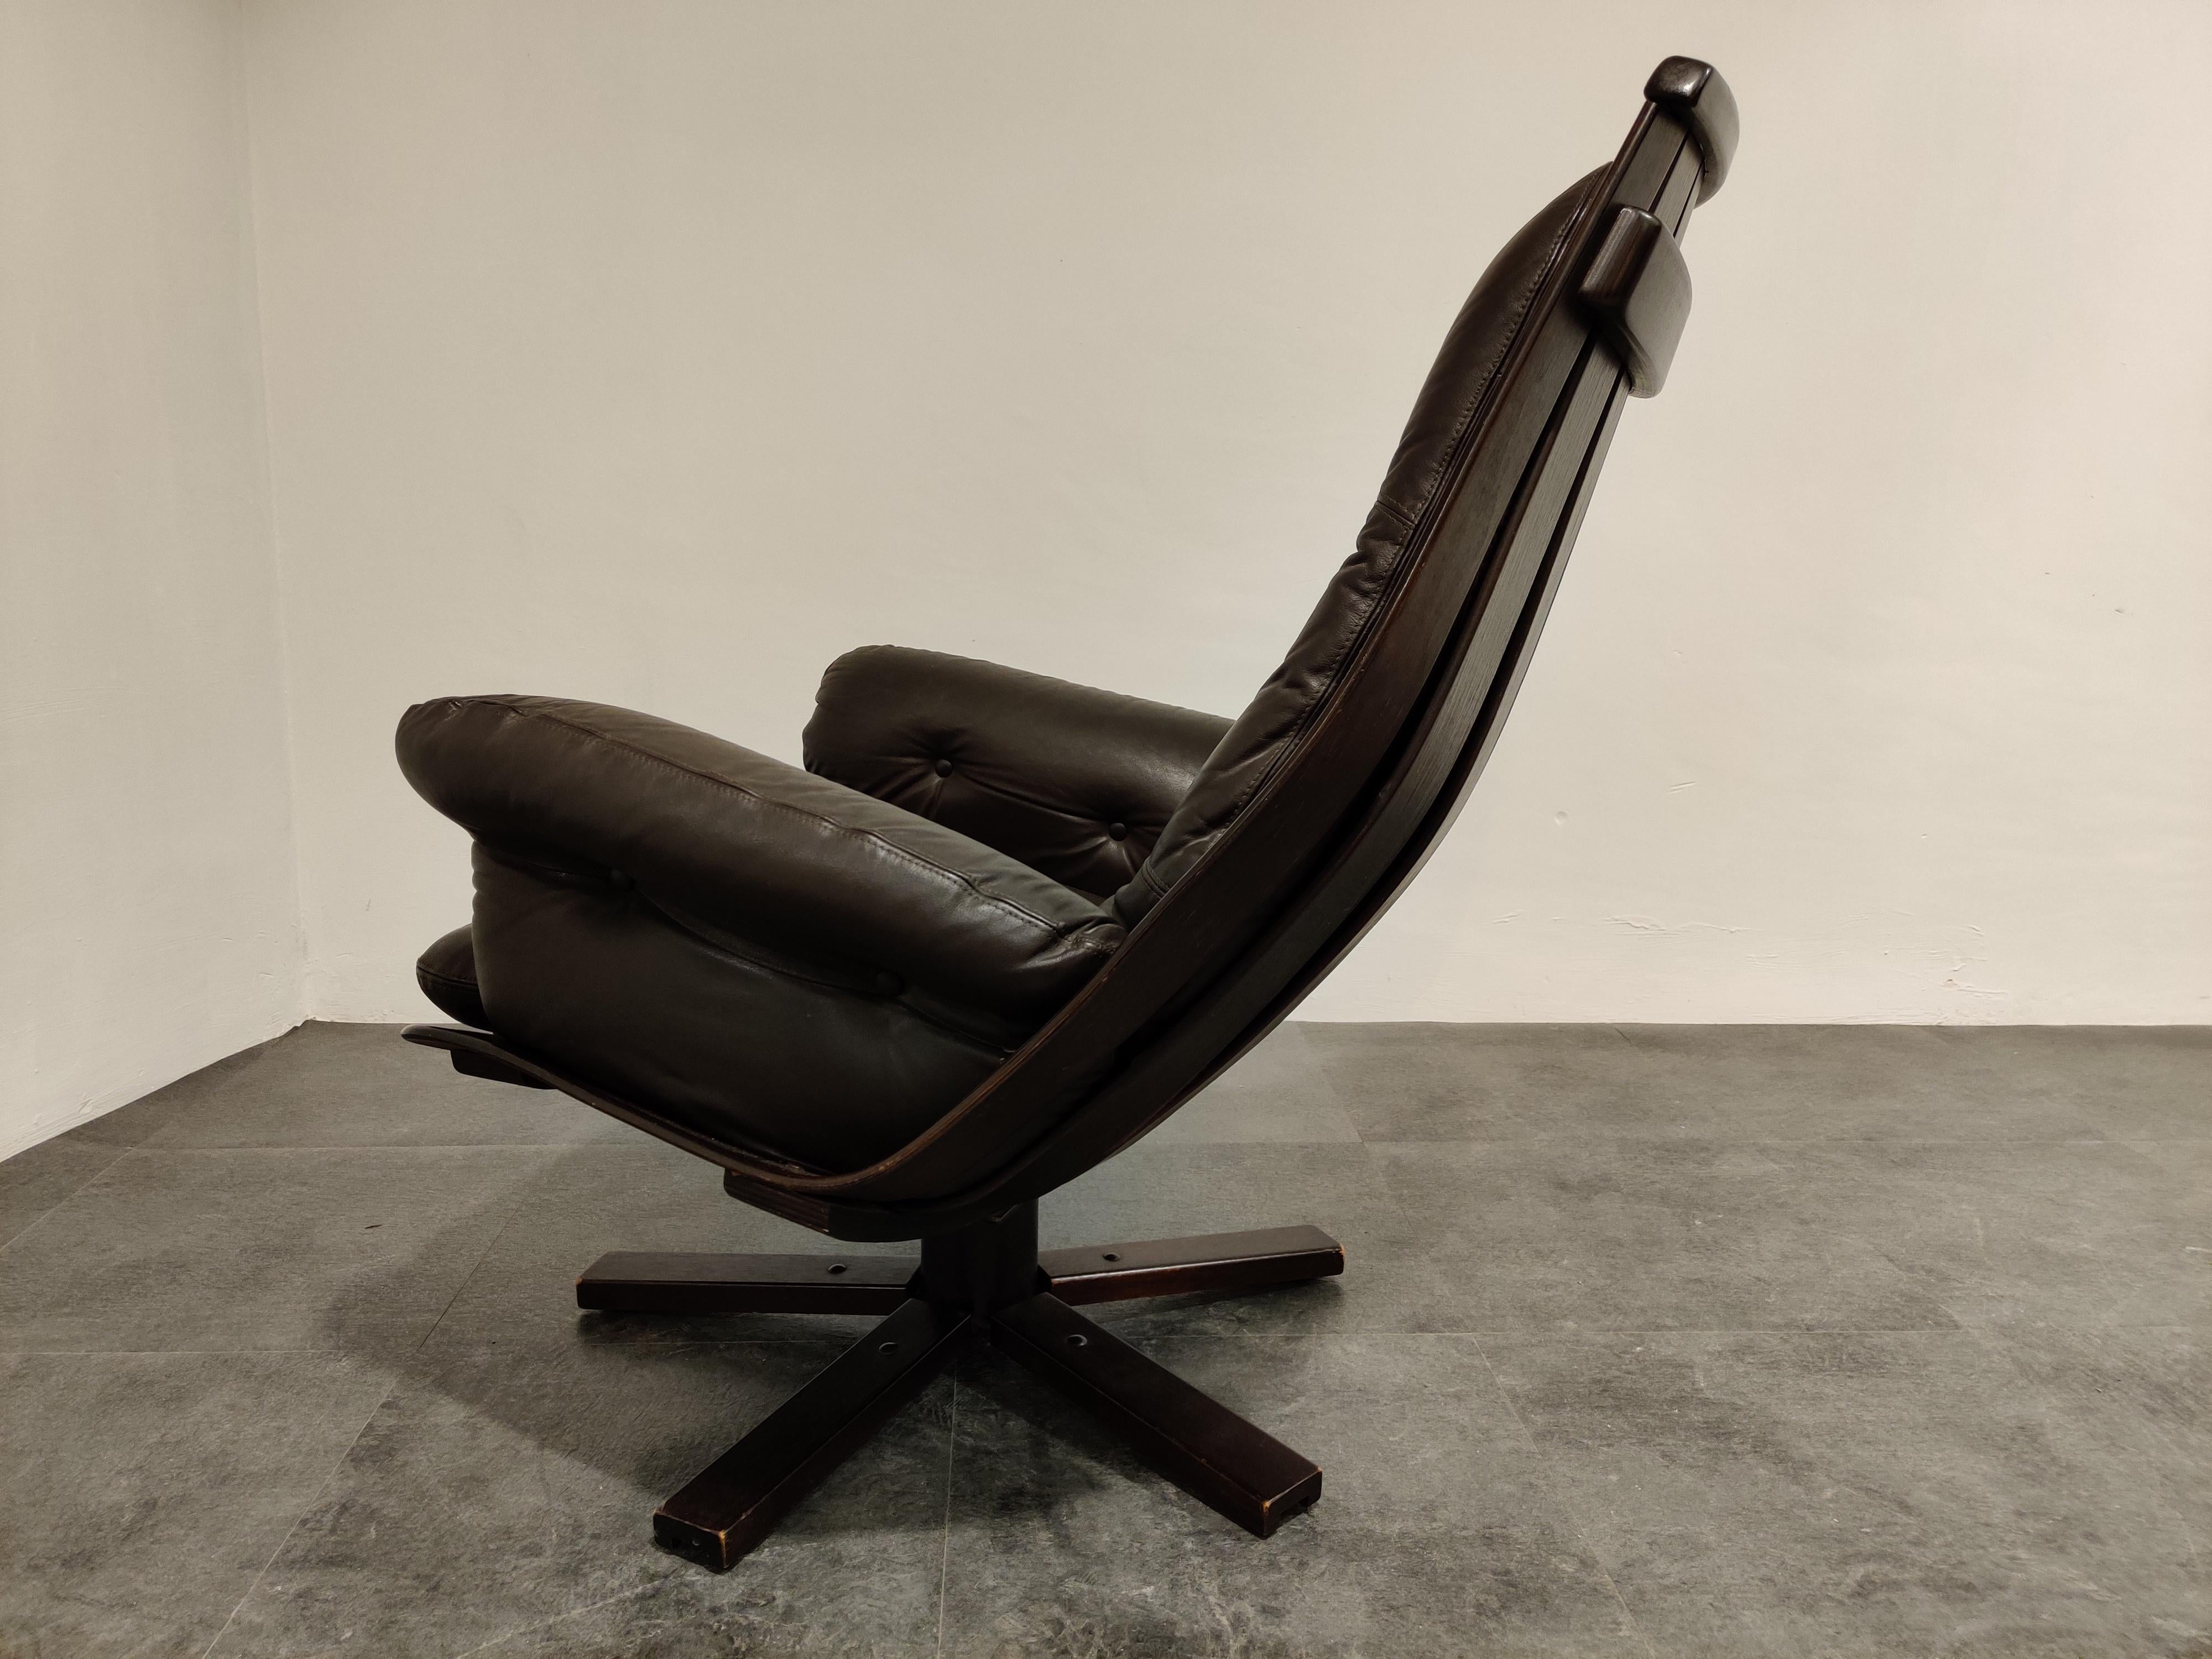 Norwegian Vintage Leather Swivel Chair Attributed to Hans Brattrud, 1960s